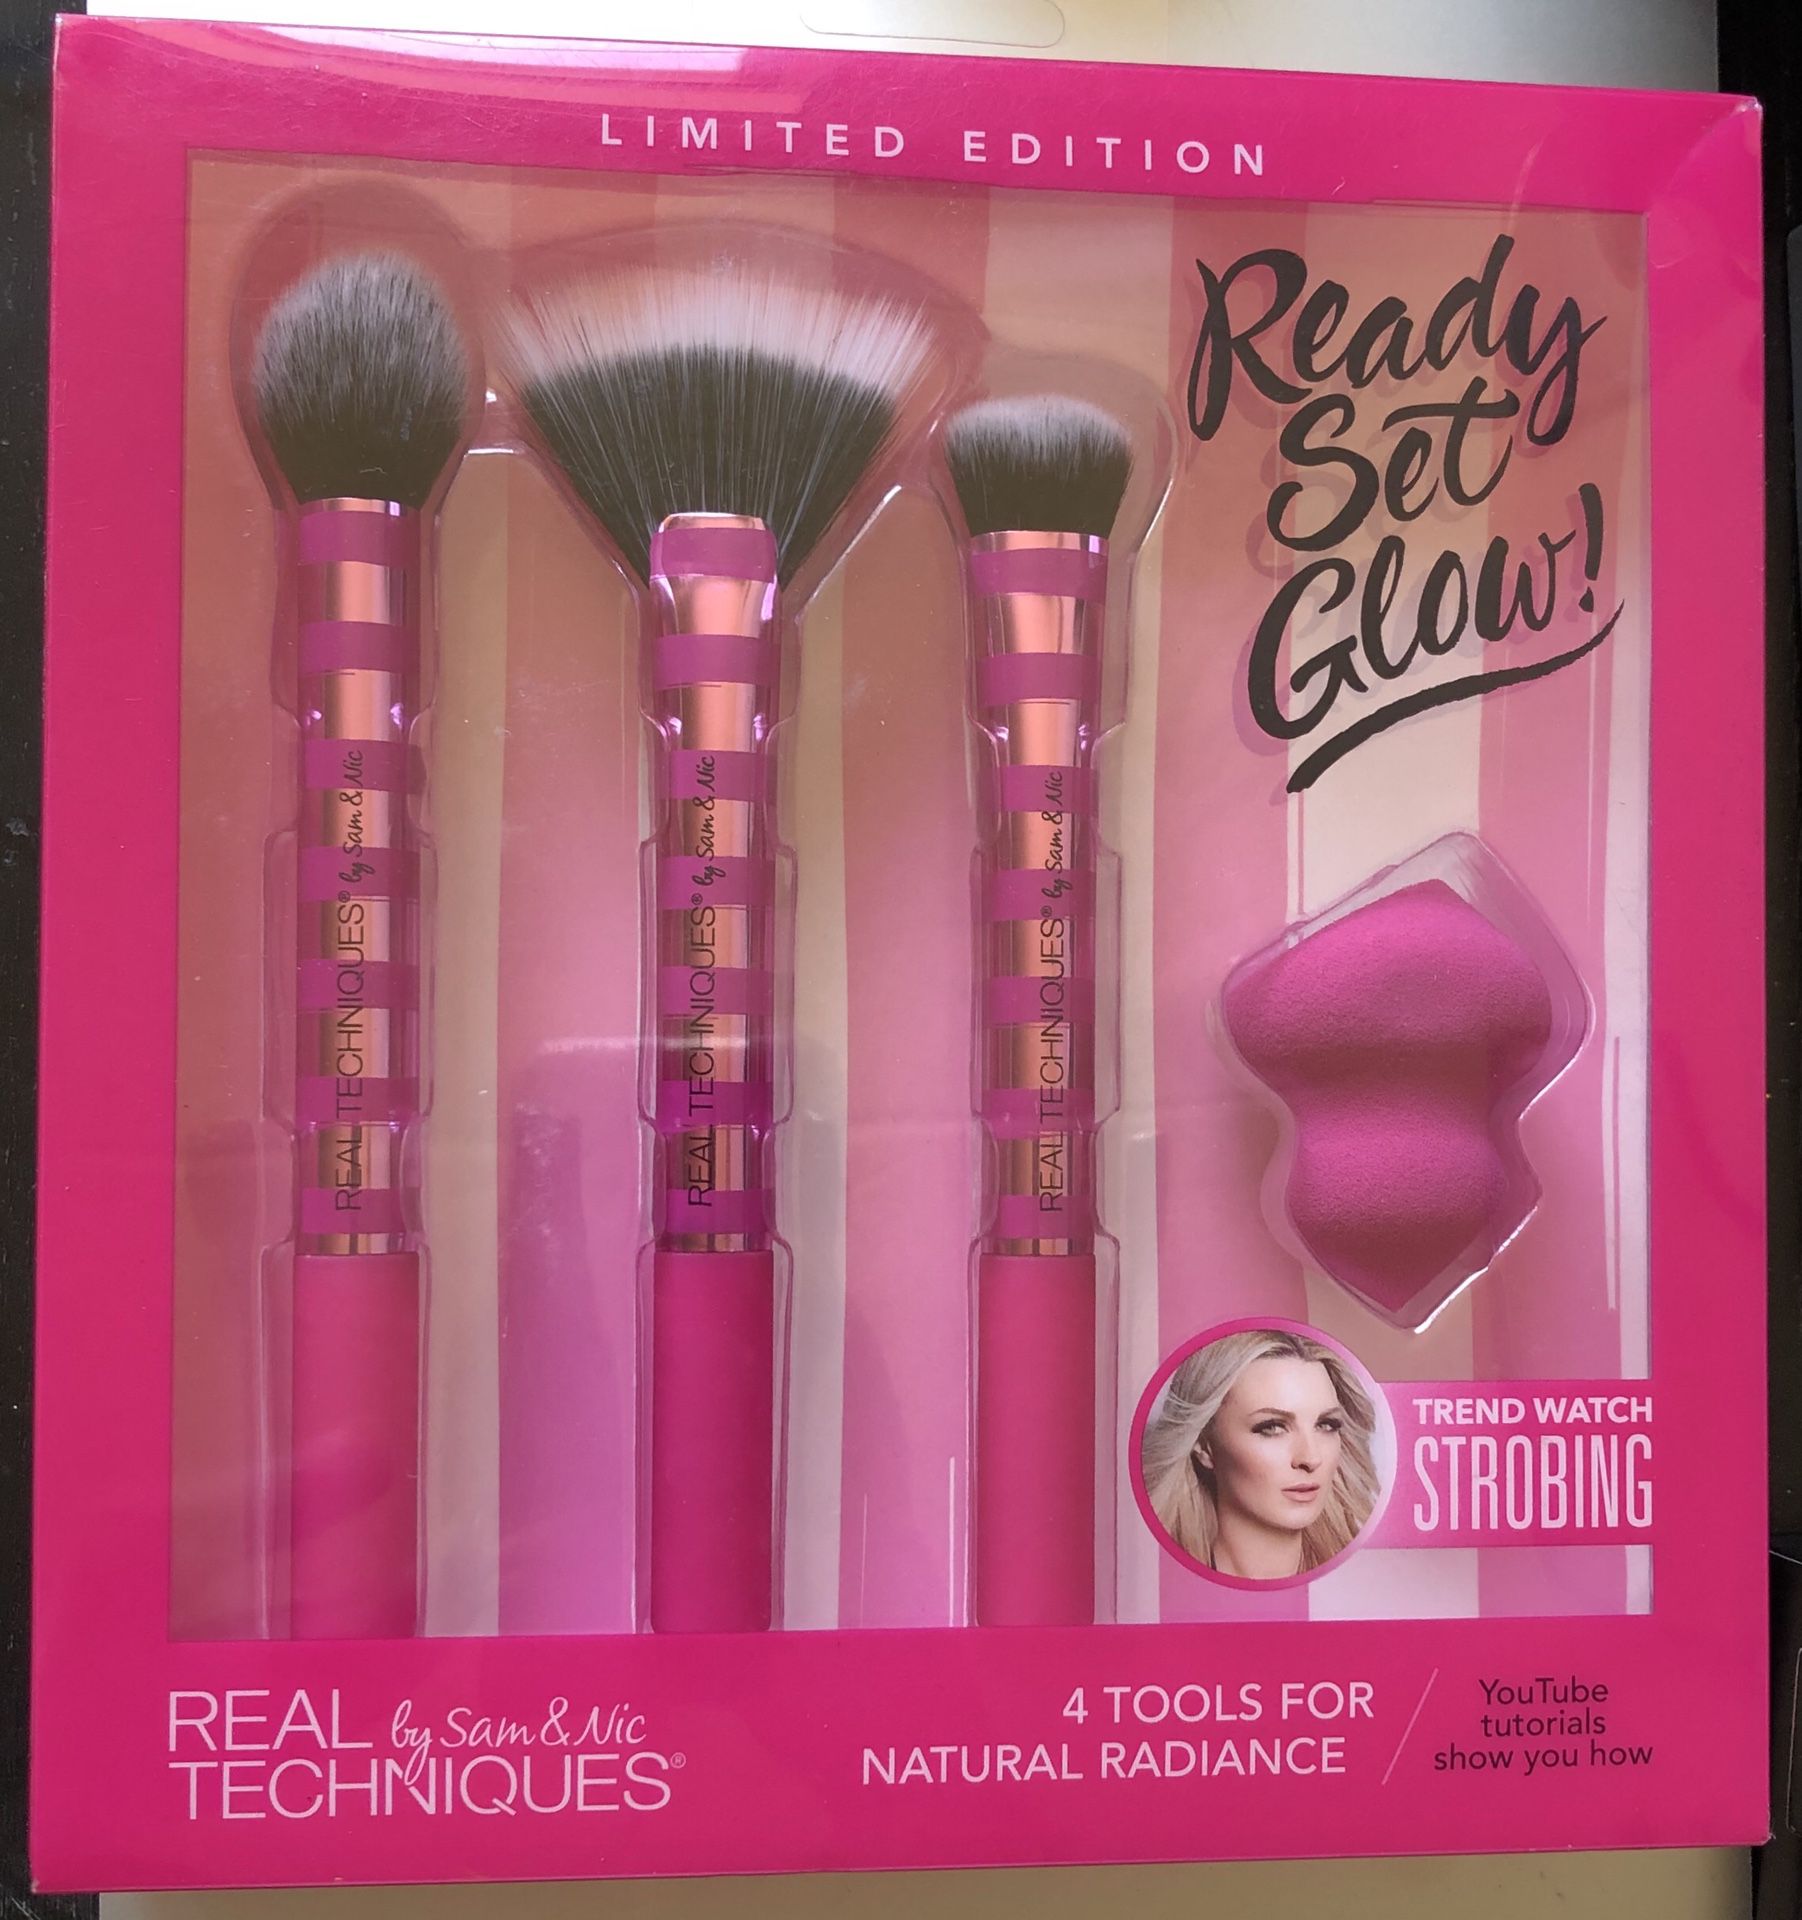 Real Techniques Limited edition Ready Set Glow Set - New Makeup Brushes & Tools